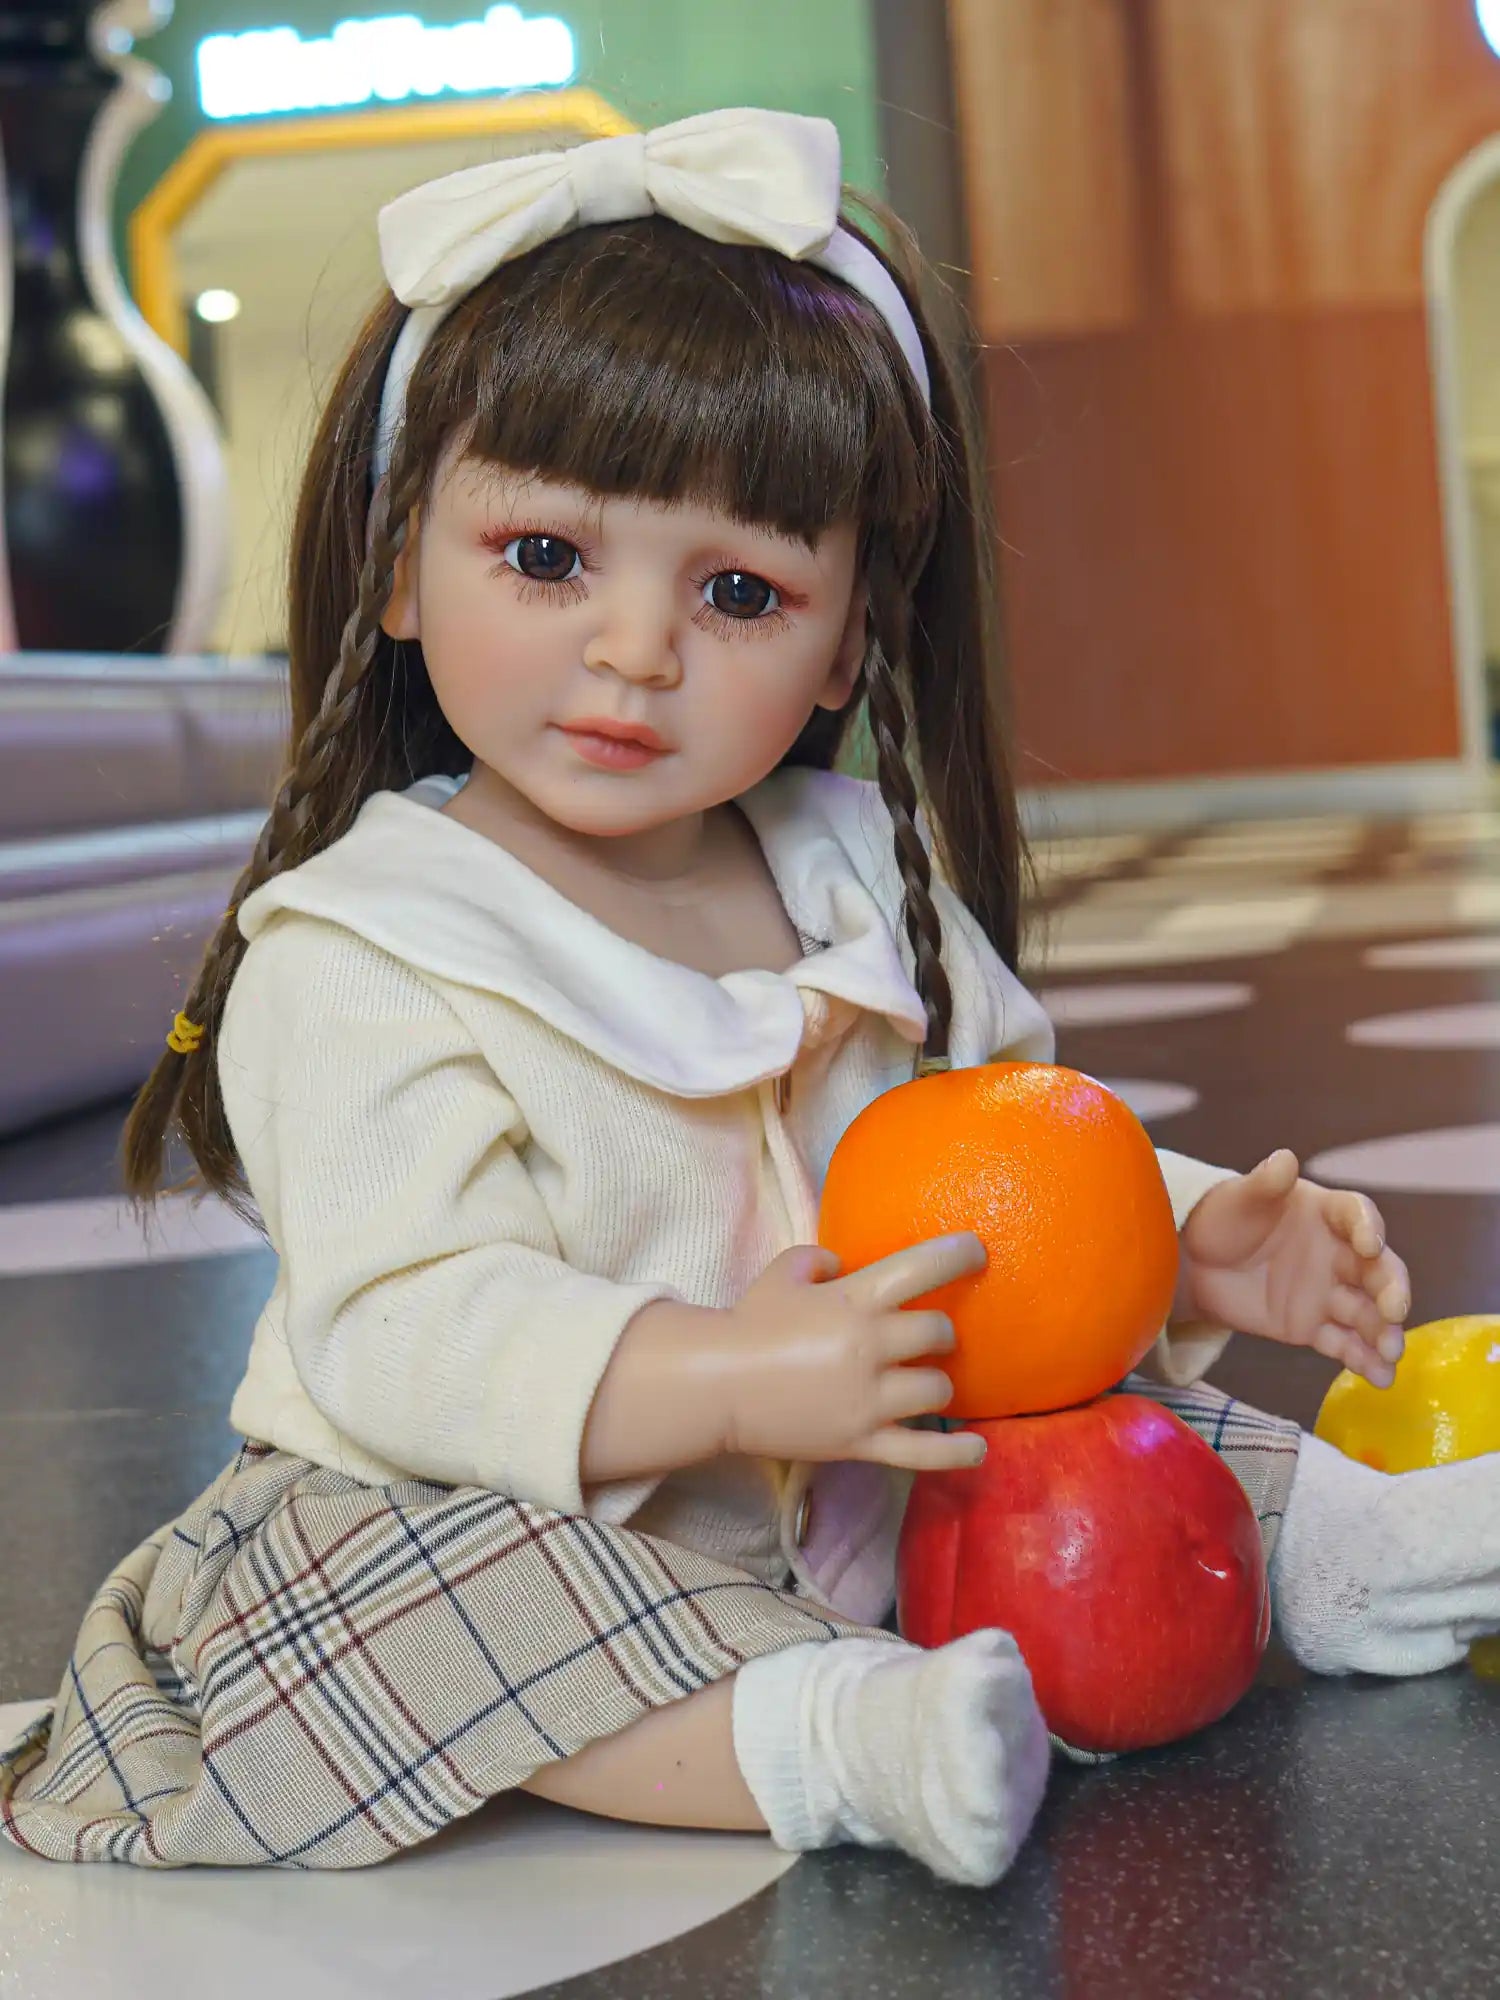 A lifelike doll with soulful eyes and braided hair, dressed in a timeless ensemble, situated in a child-friendly setting.